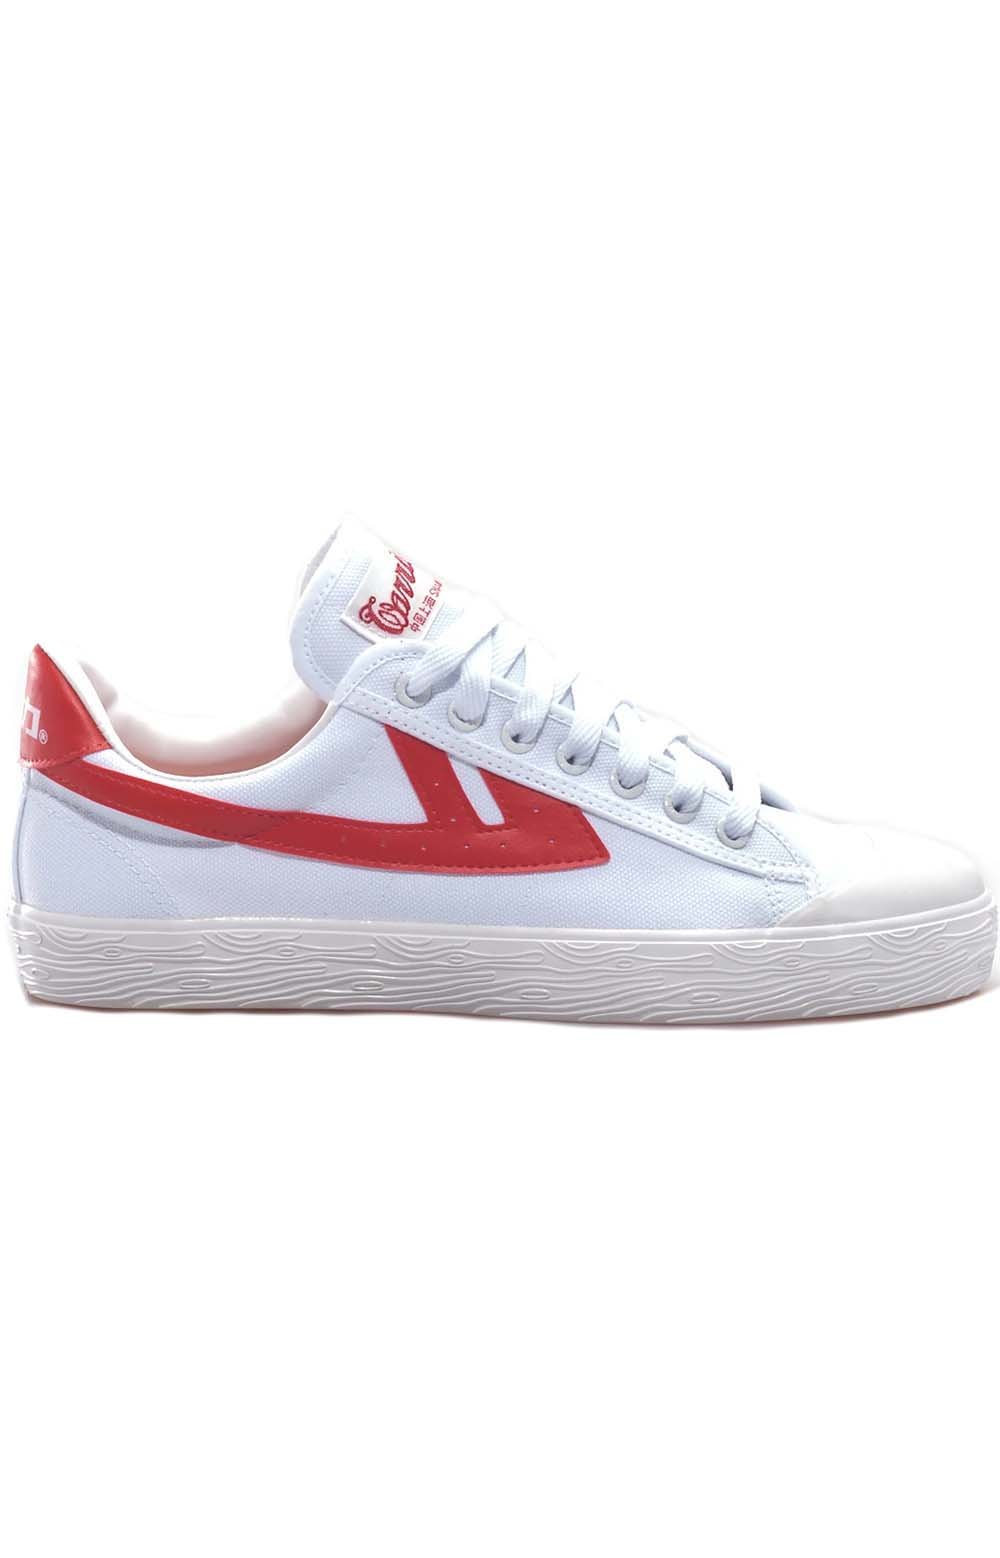 WB-1 Shoes - White/Red